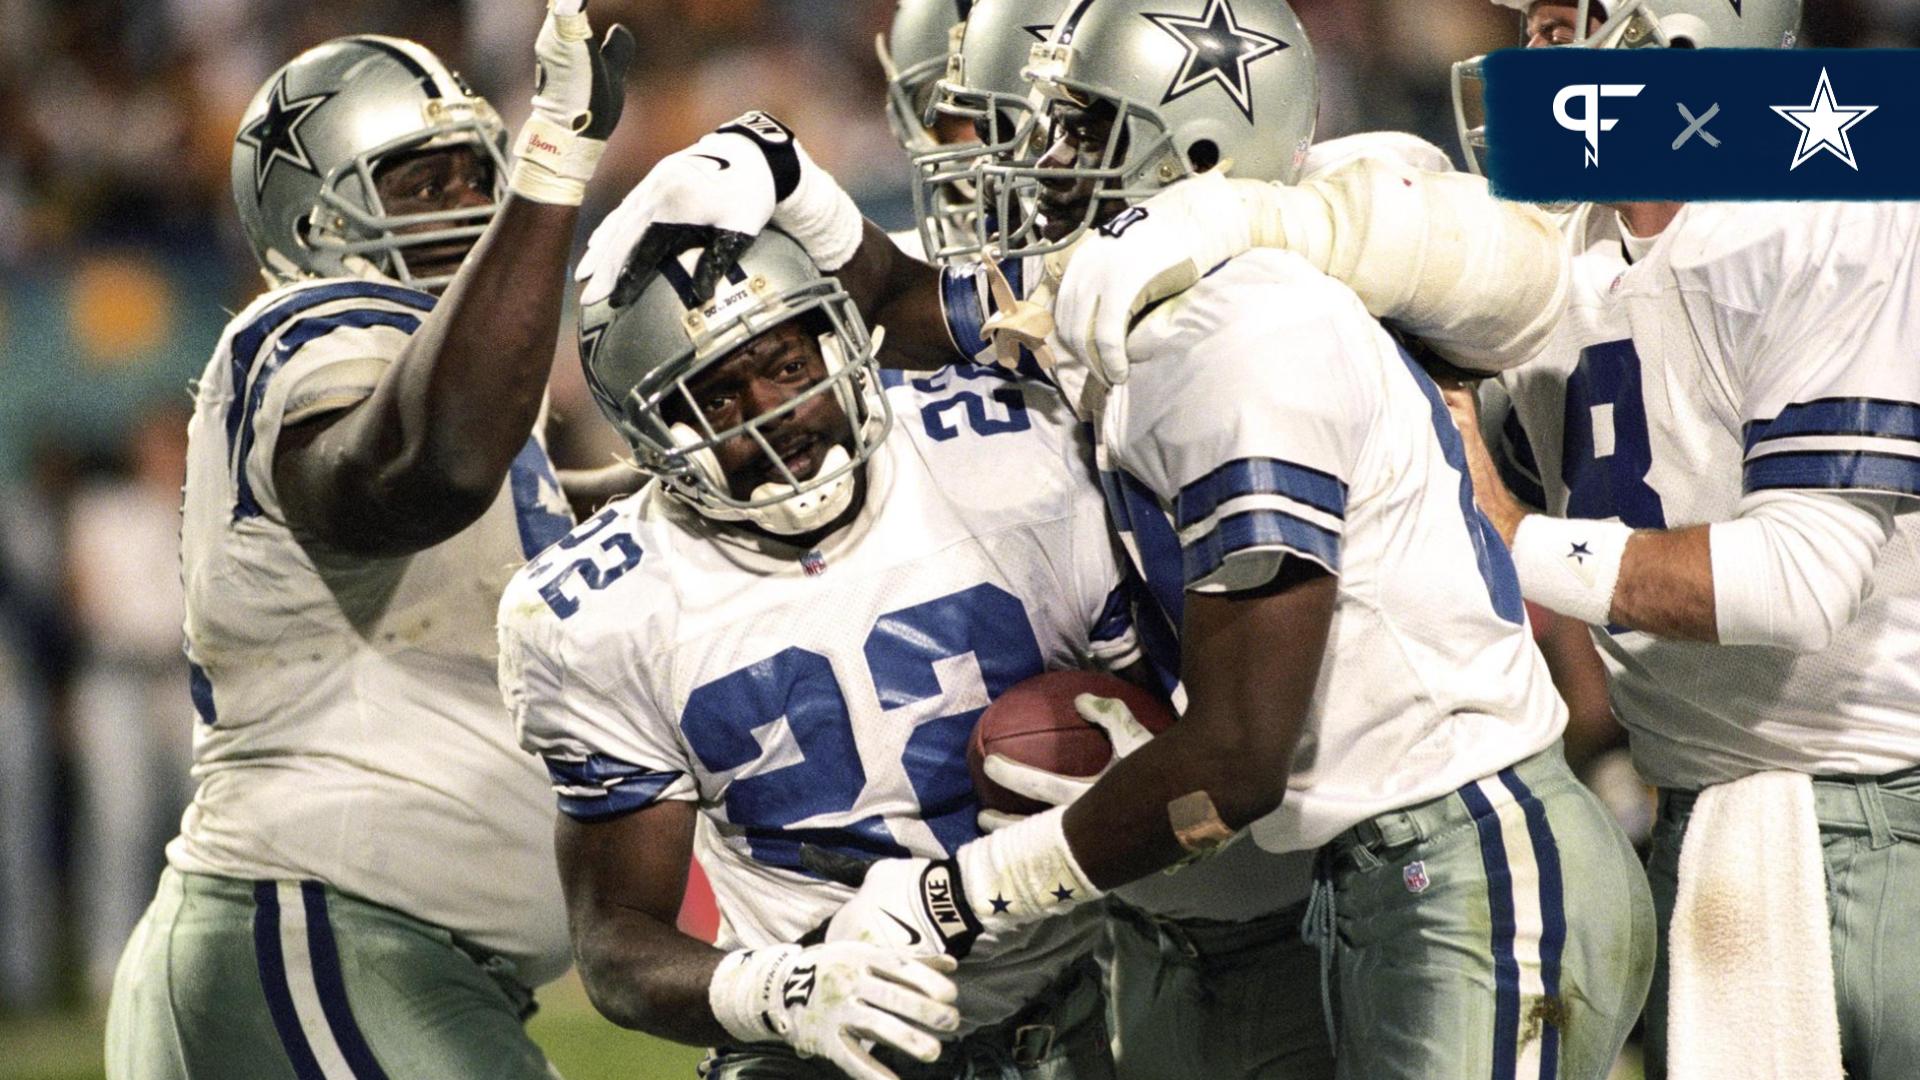 Emmitt Smith of the Dallas Cowboys carries the ball against the